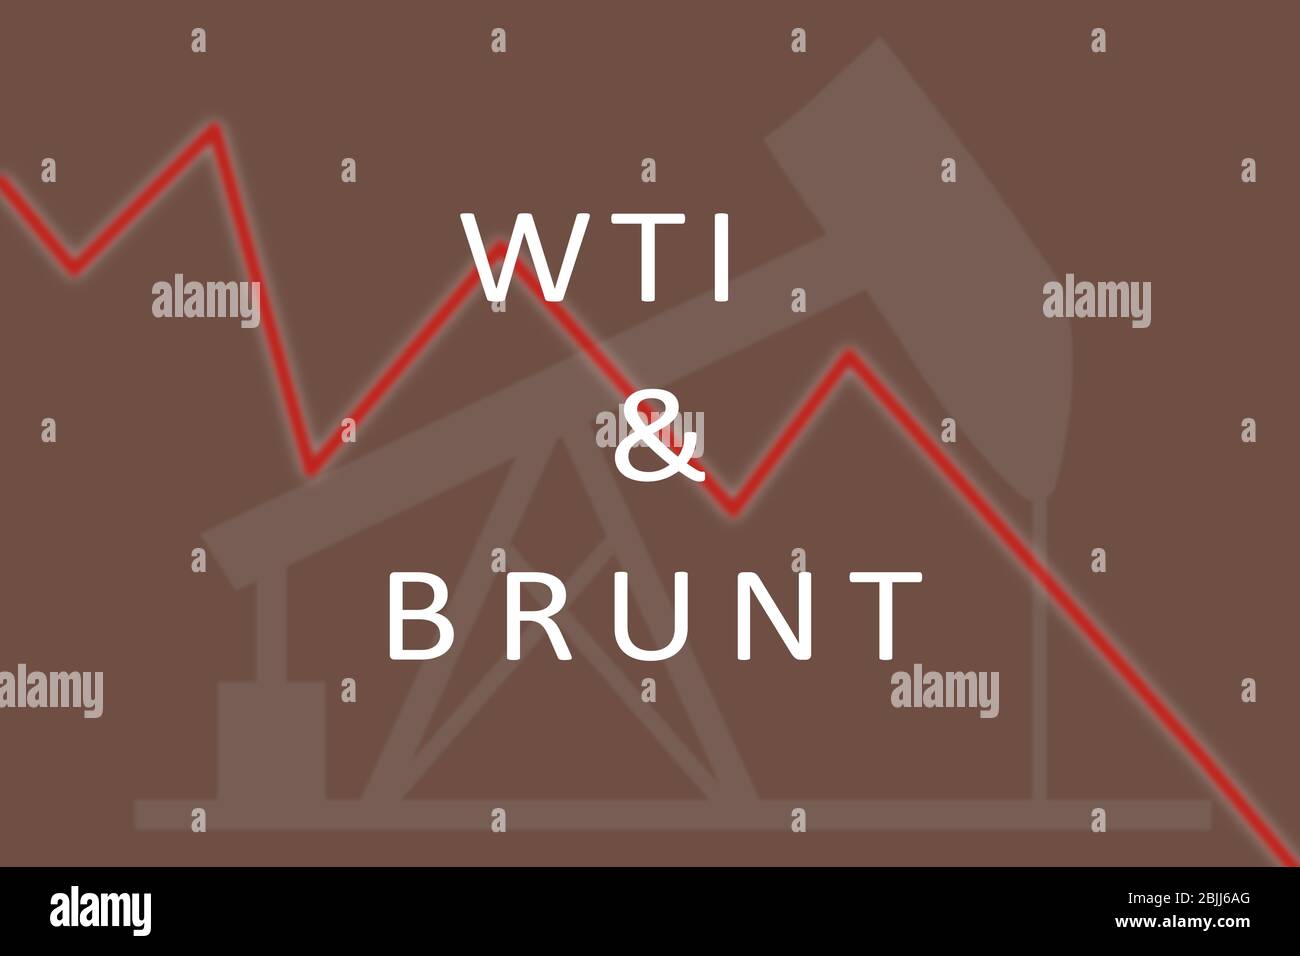 Concept of WTI and Brunt Crude oil price falling or crash down graph illustration. Stock Photo